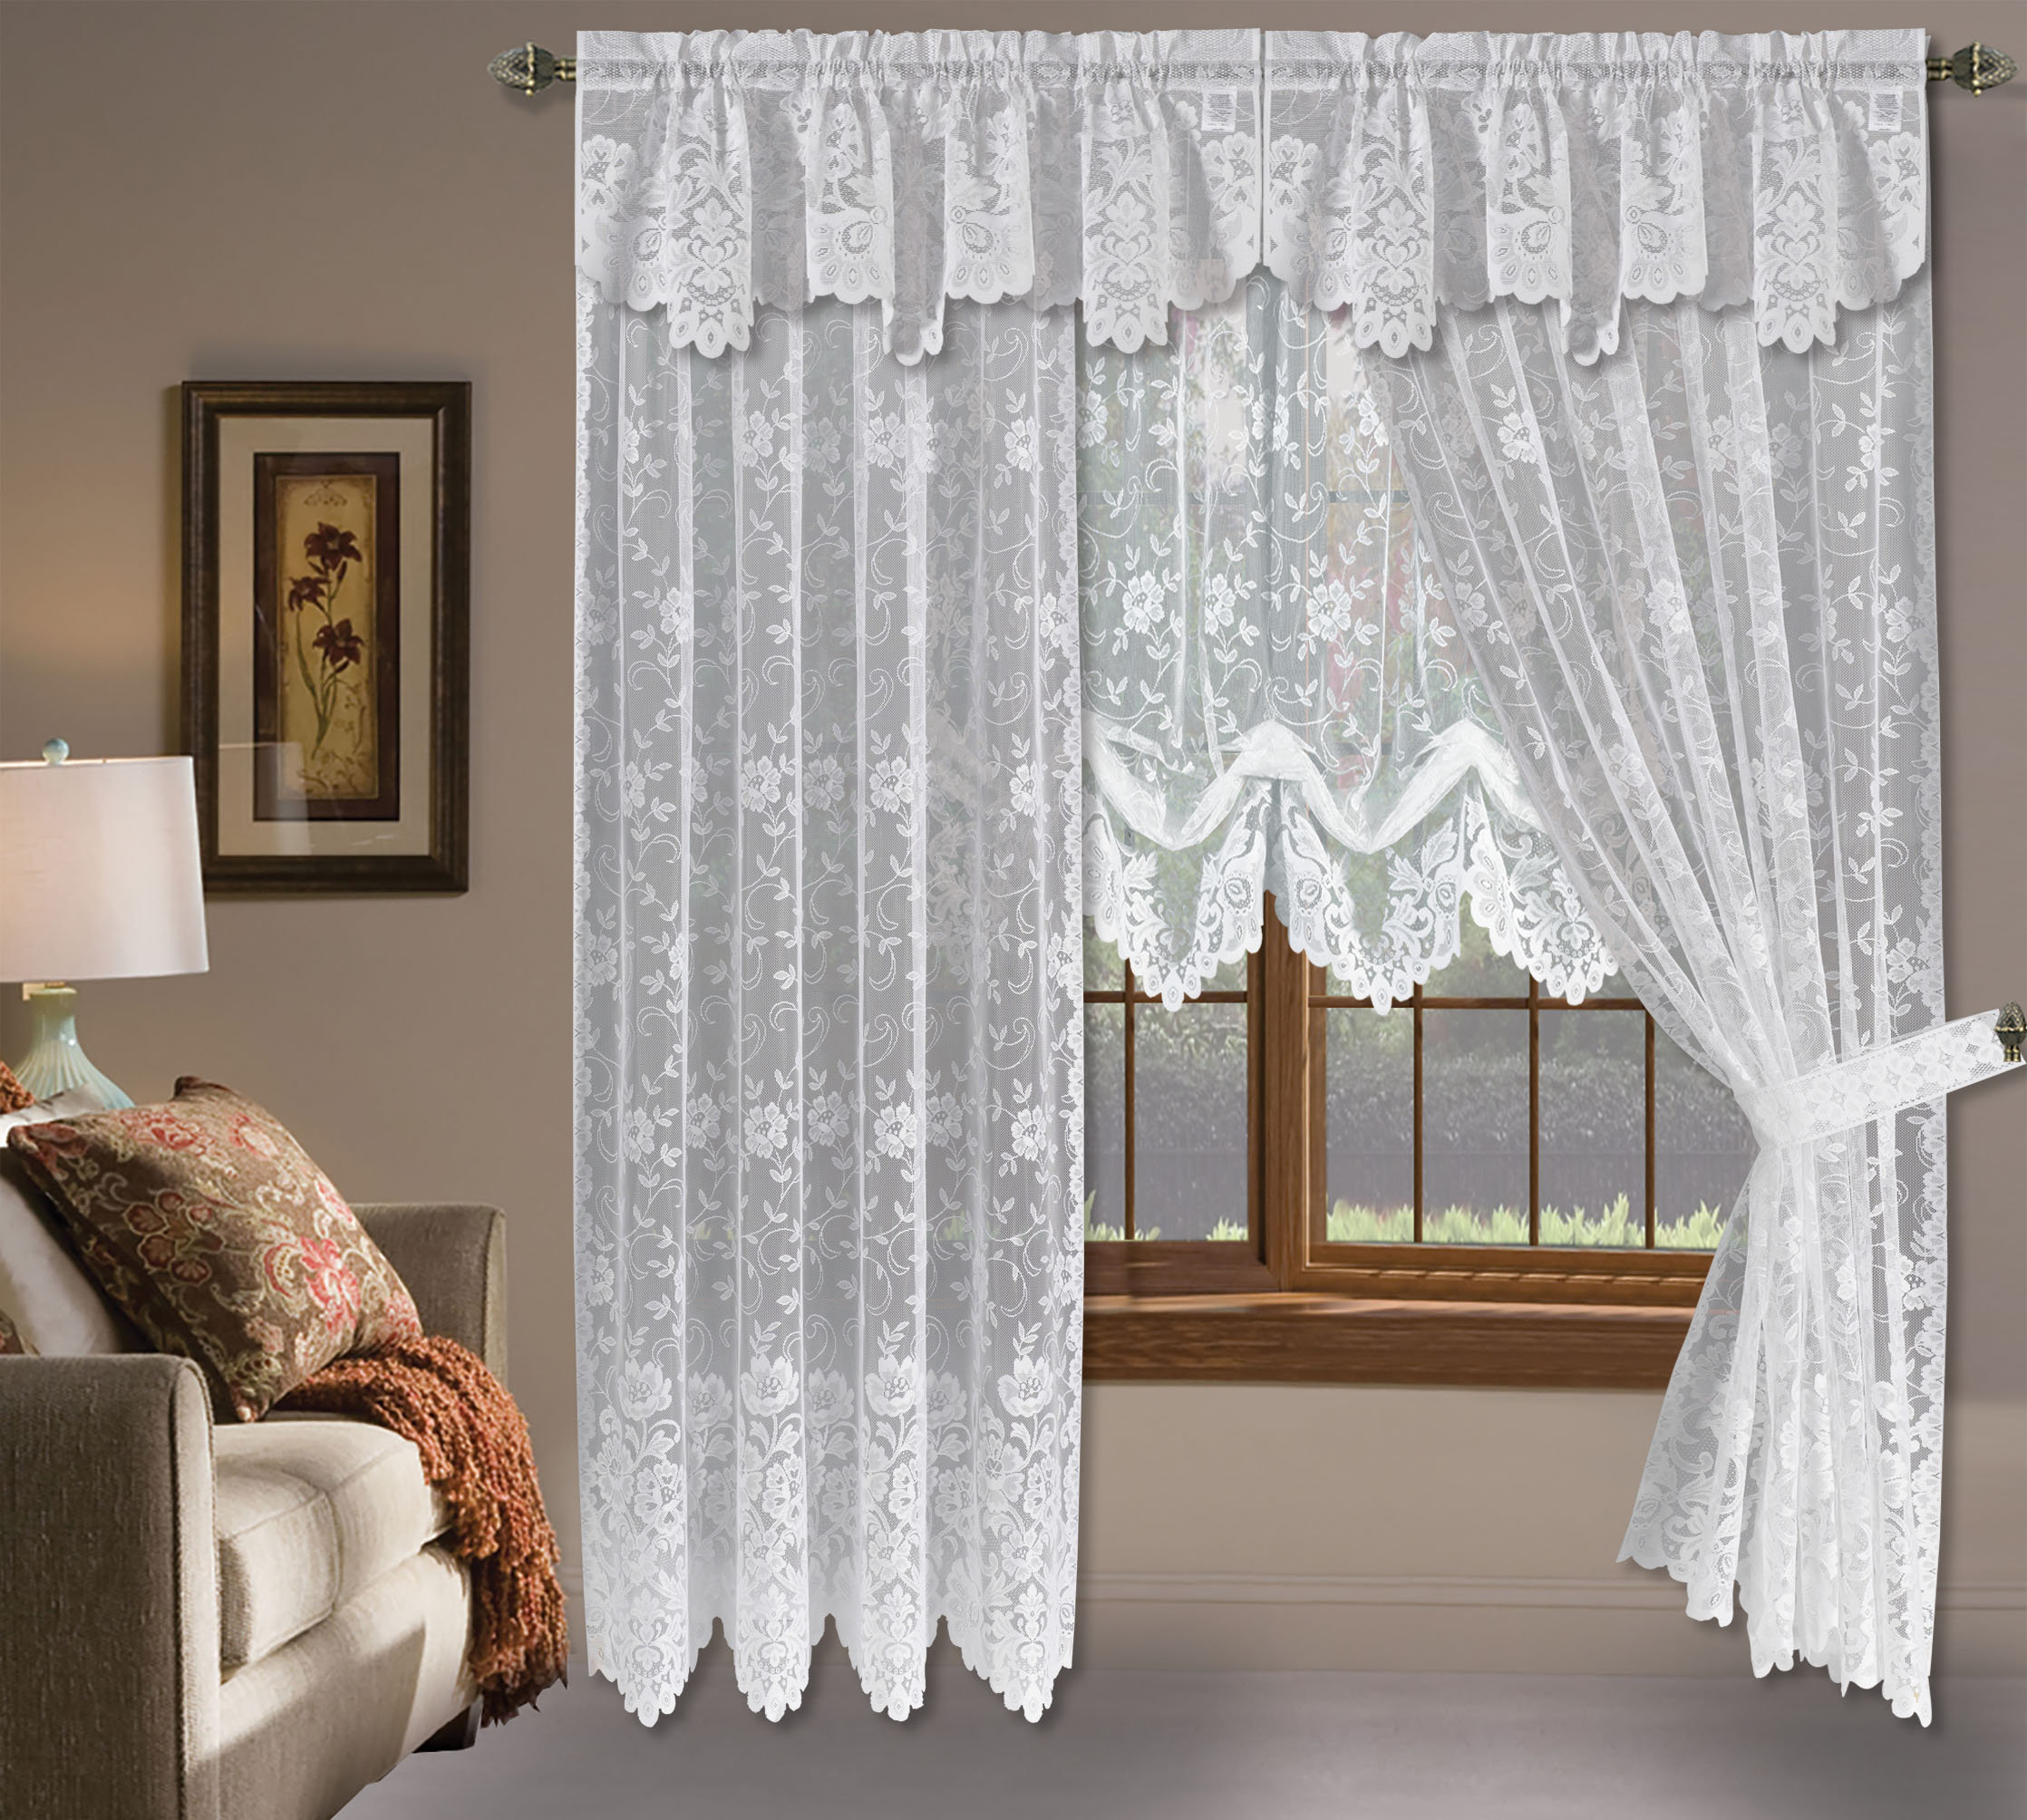 Grace Shabby Chic Fl Lace Window, How To Hang Curtains With A Separate Valance